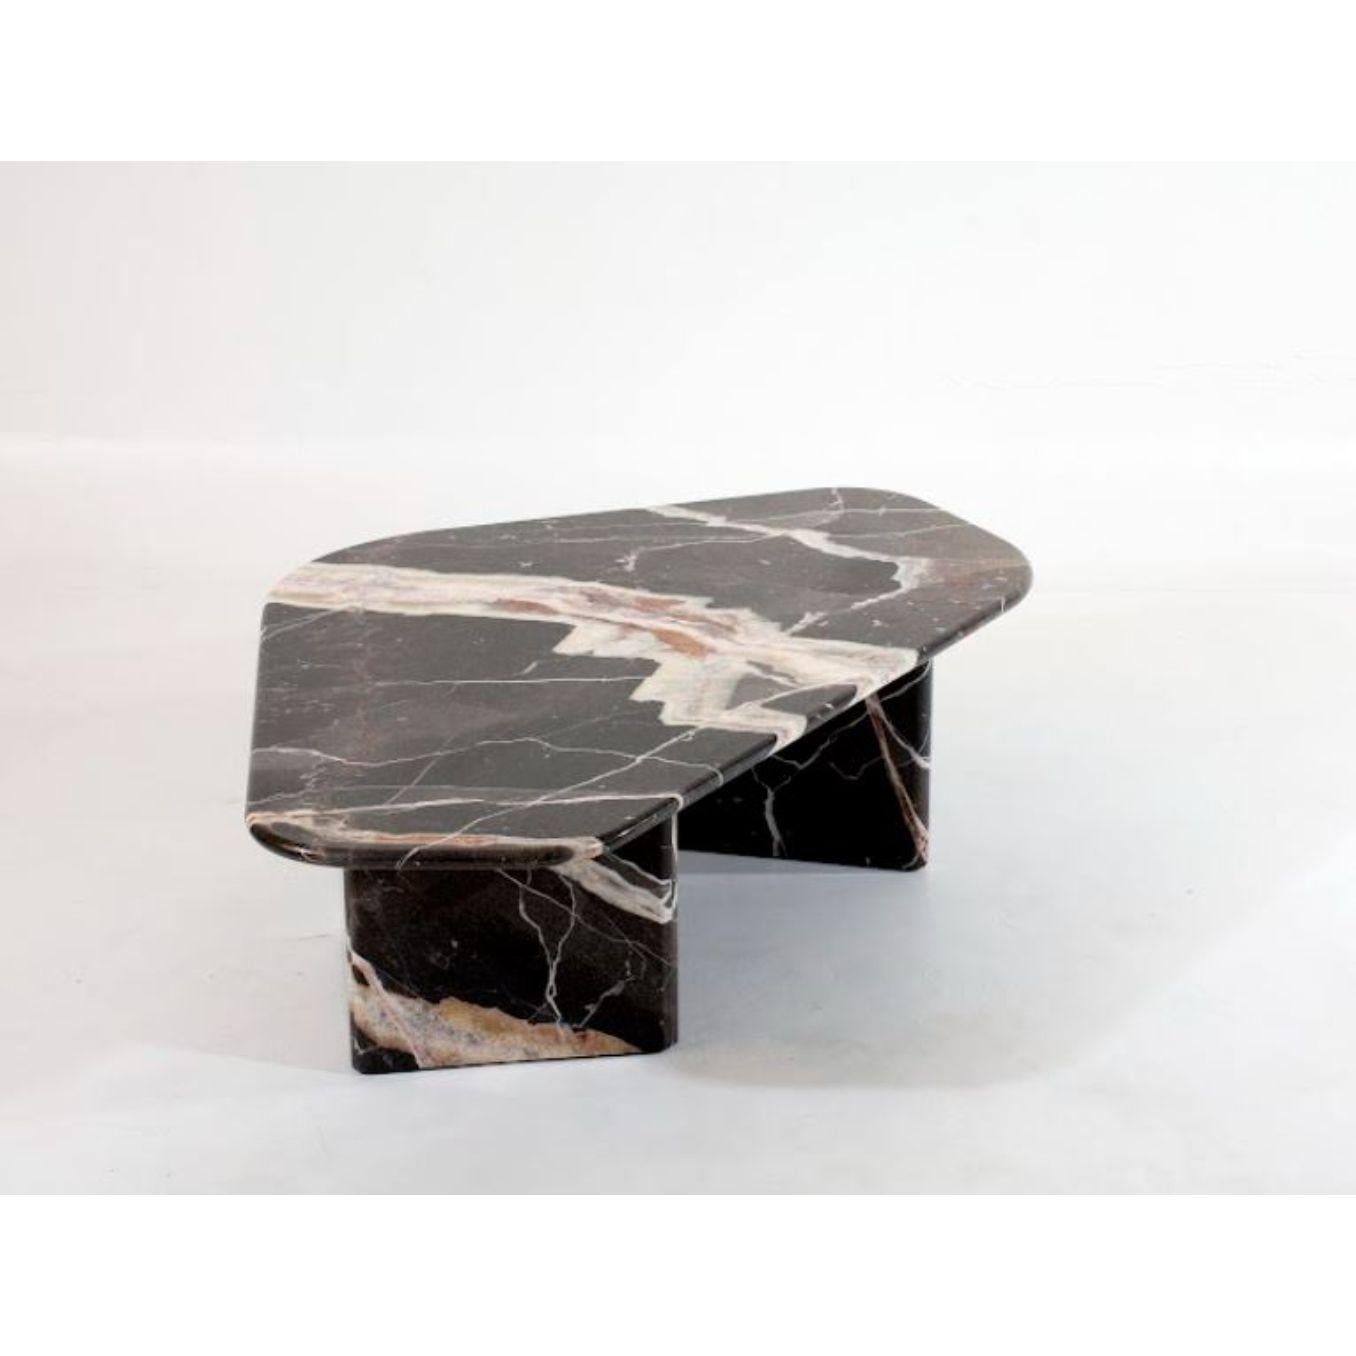 Collected Memory Coffee Table 2 by Claste 
Dimensions: D 43.2 x W 45.7 x H 30.5 cm.
Material: Marble
Weight: 27.3 kg

Since 2017 Quinlan Osborne has cultivated an aesthetic in his work that is rooted in the passion for contemporary design he